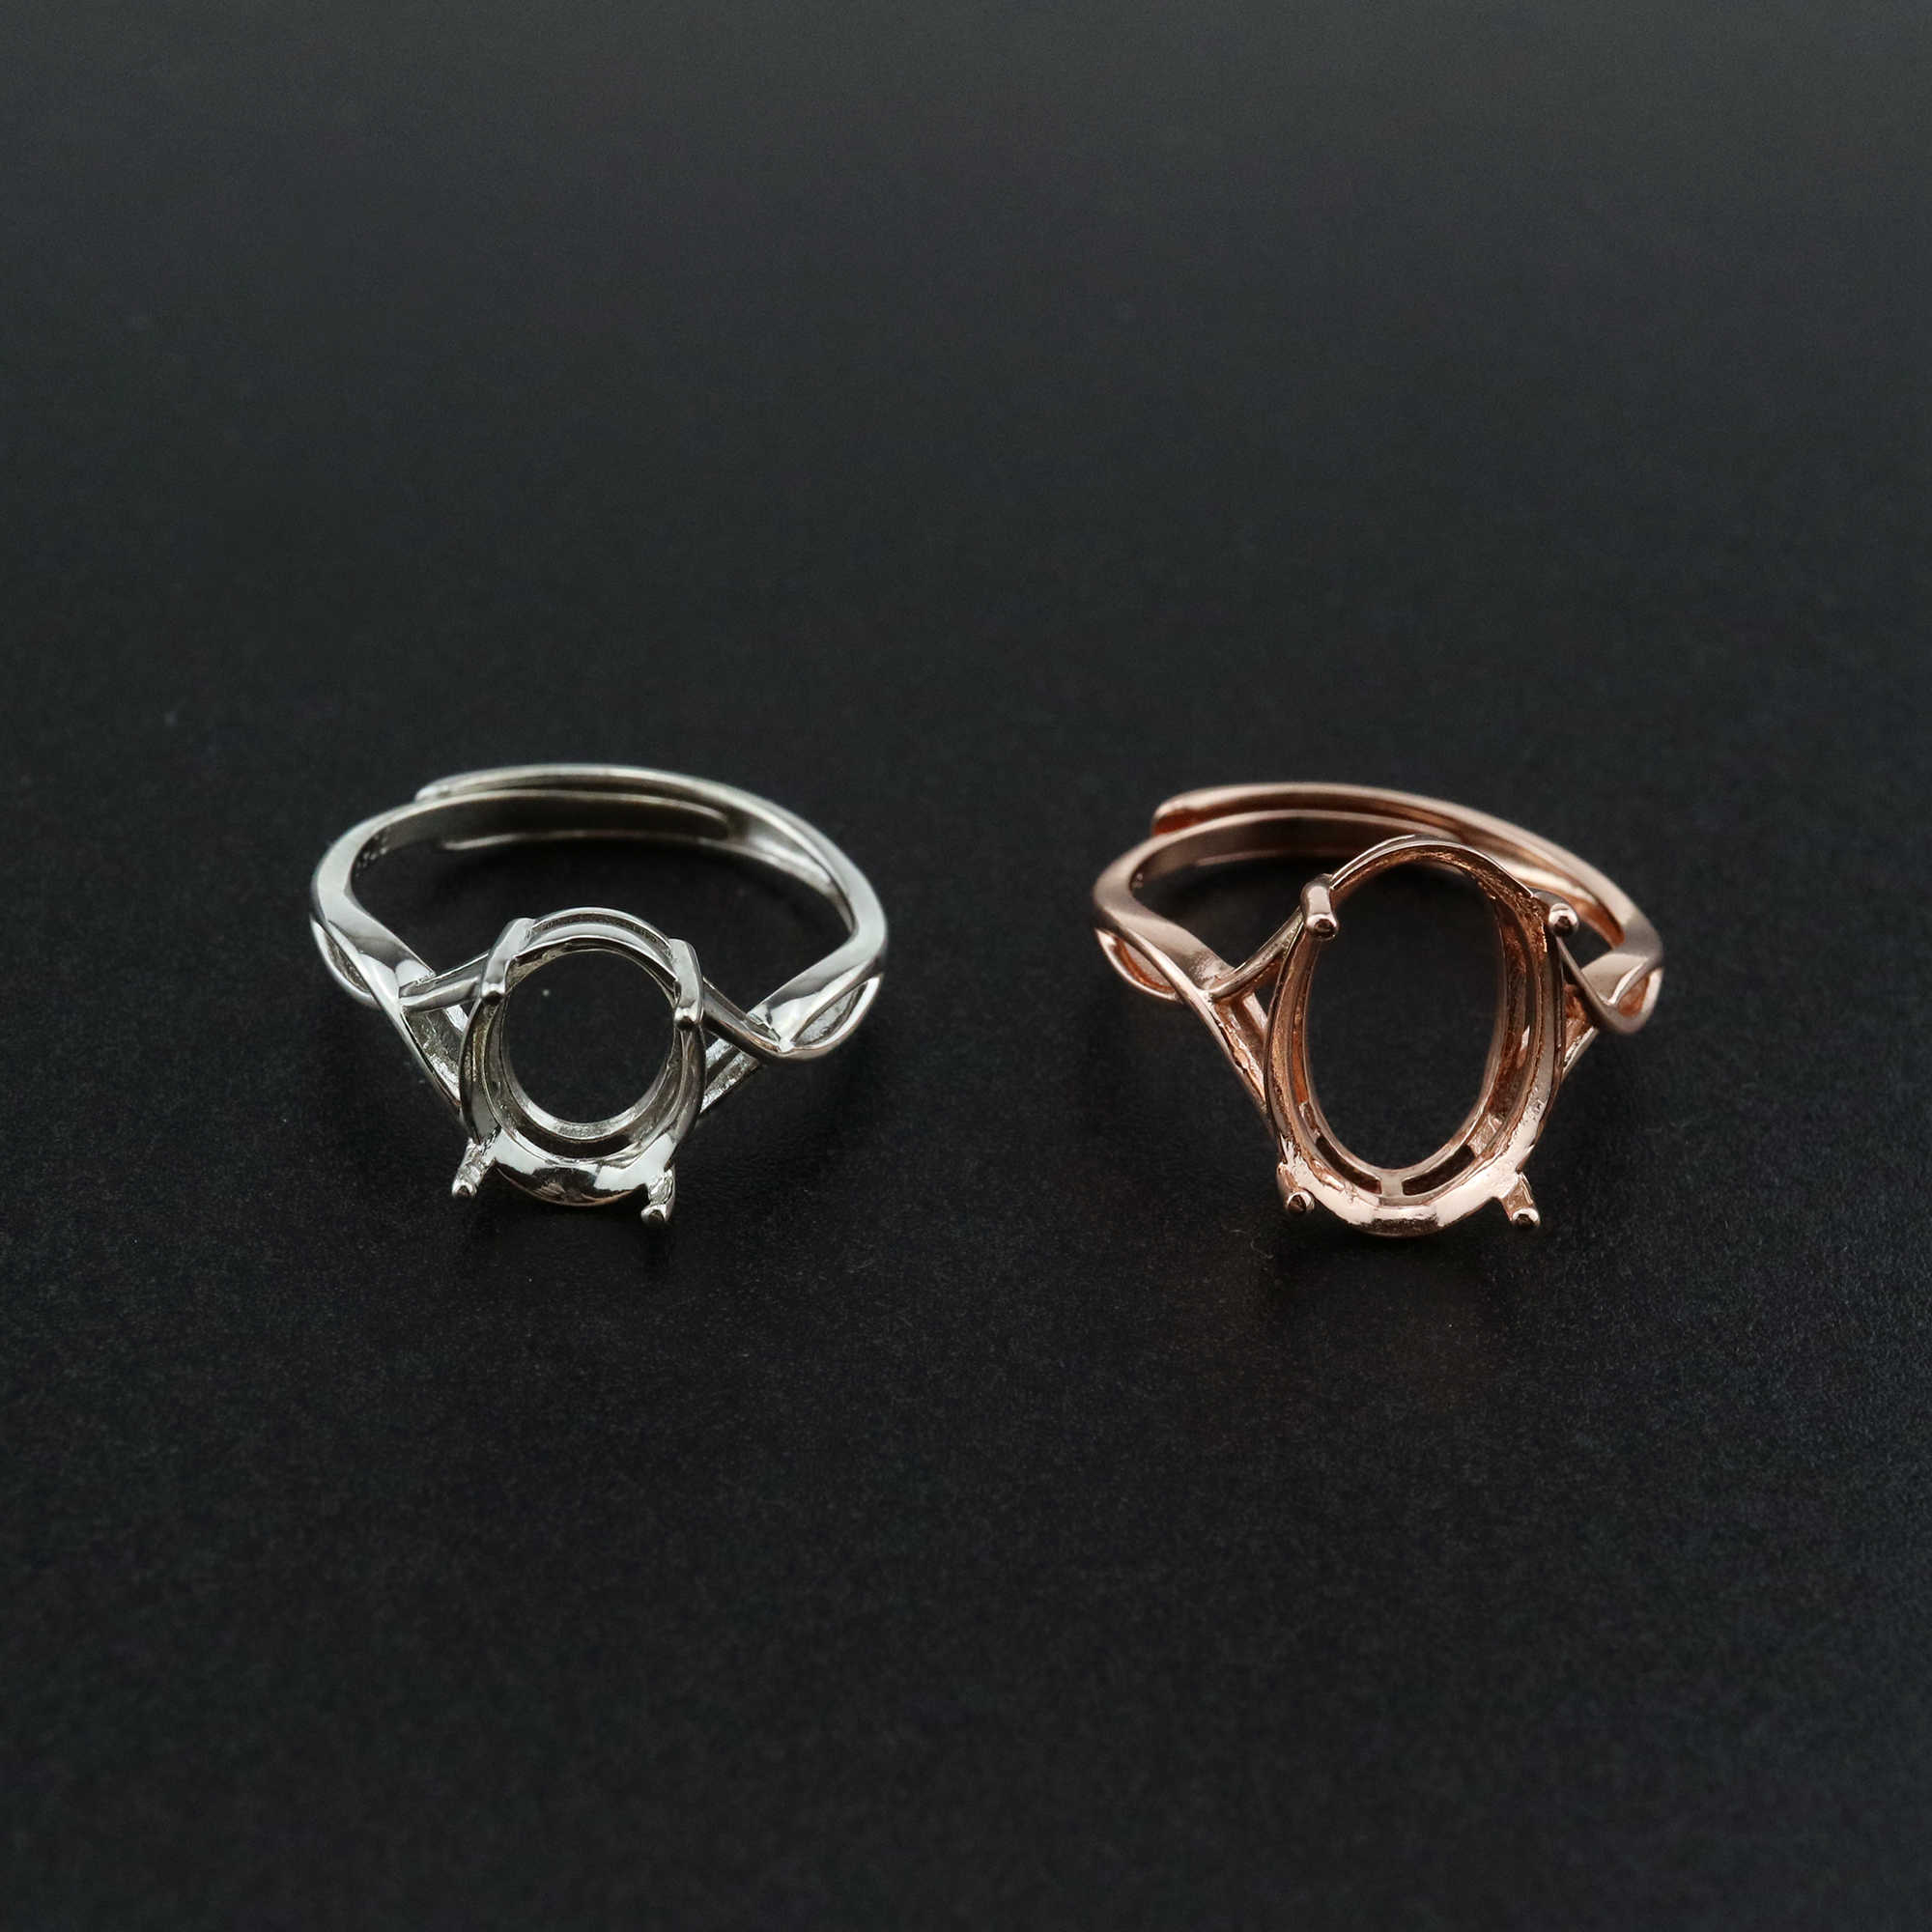 1Pcs Multiple Size Split Shank Oval Prong Bezel Rose Gold Plated Solid 925 Sterling Silver Adjustable Ring Settings for Moissanite Gemstone DIY Supplies 1224028 - Click Image to Close